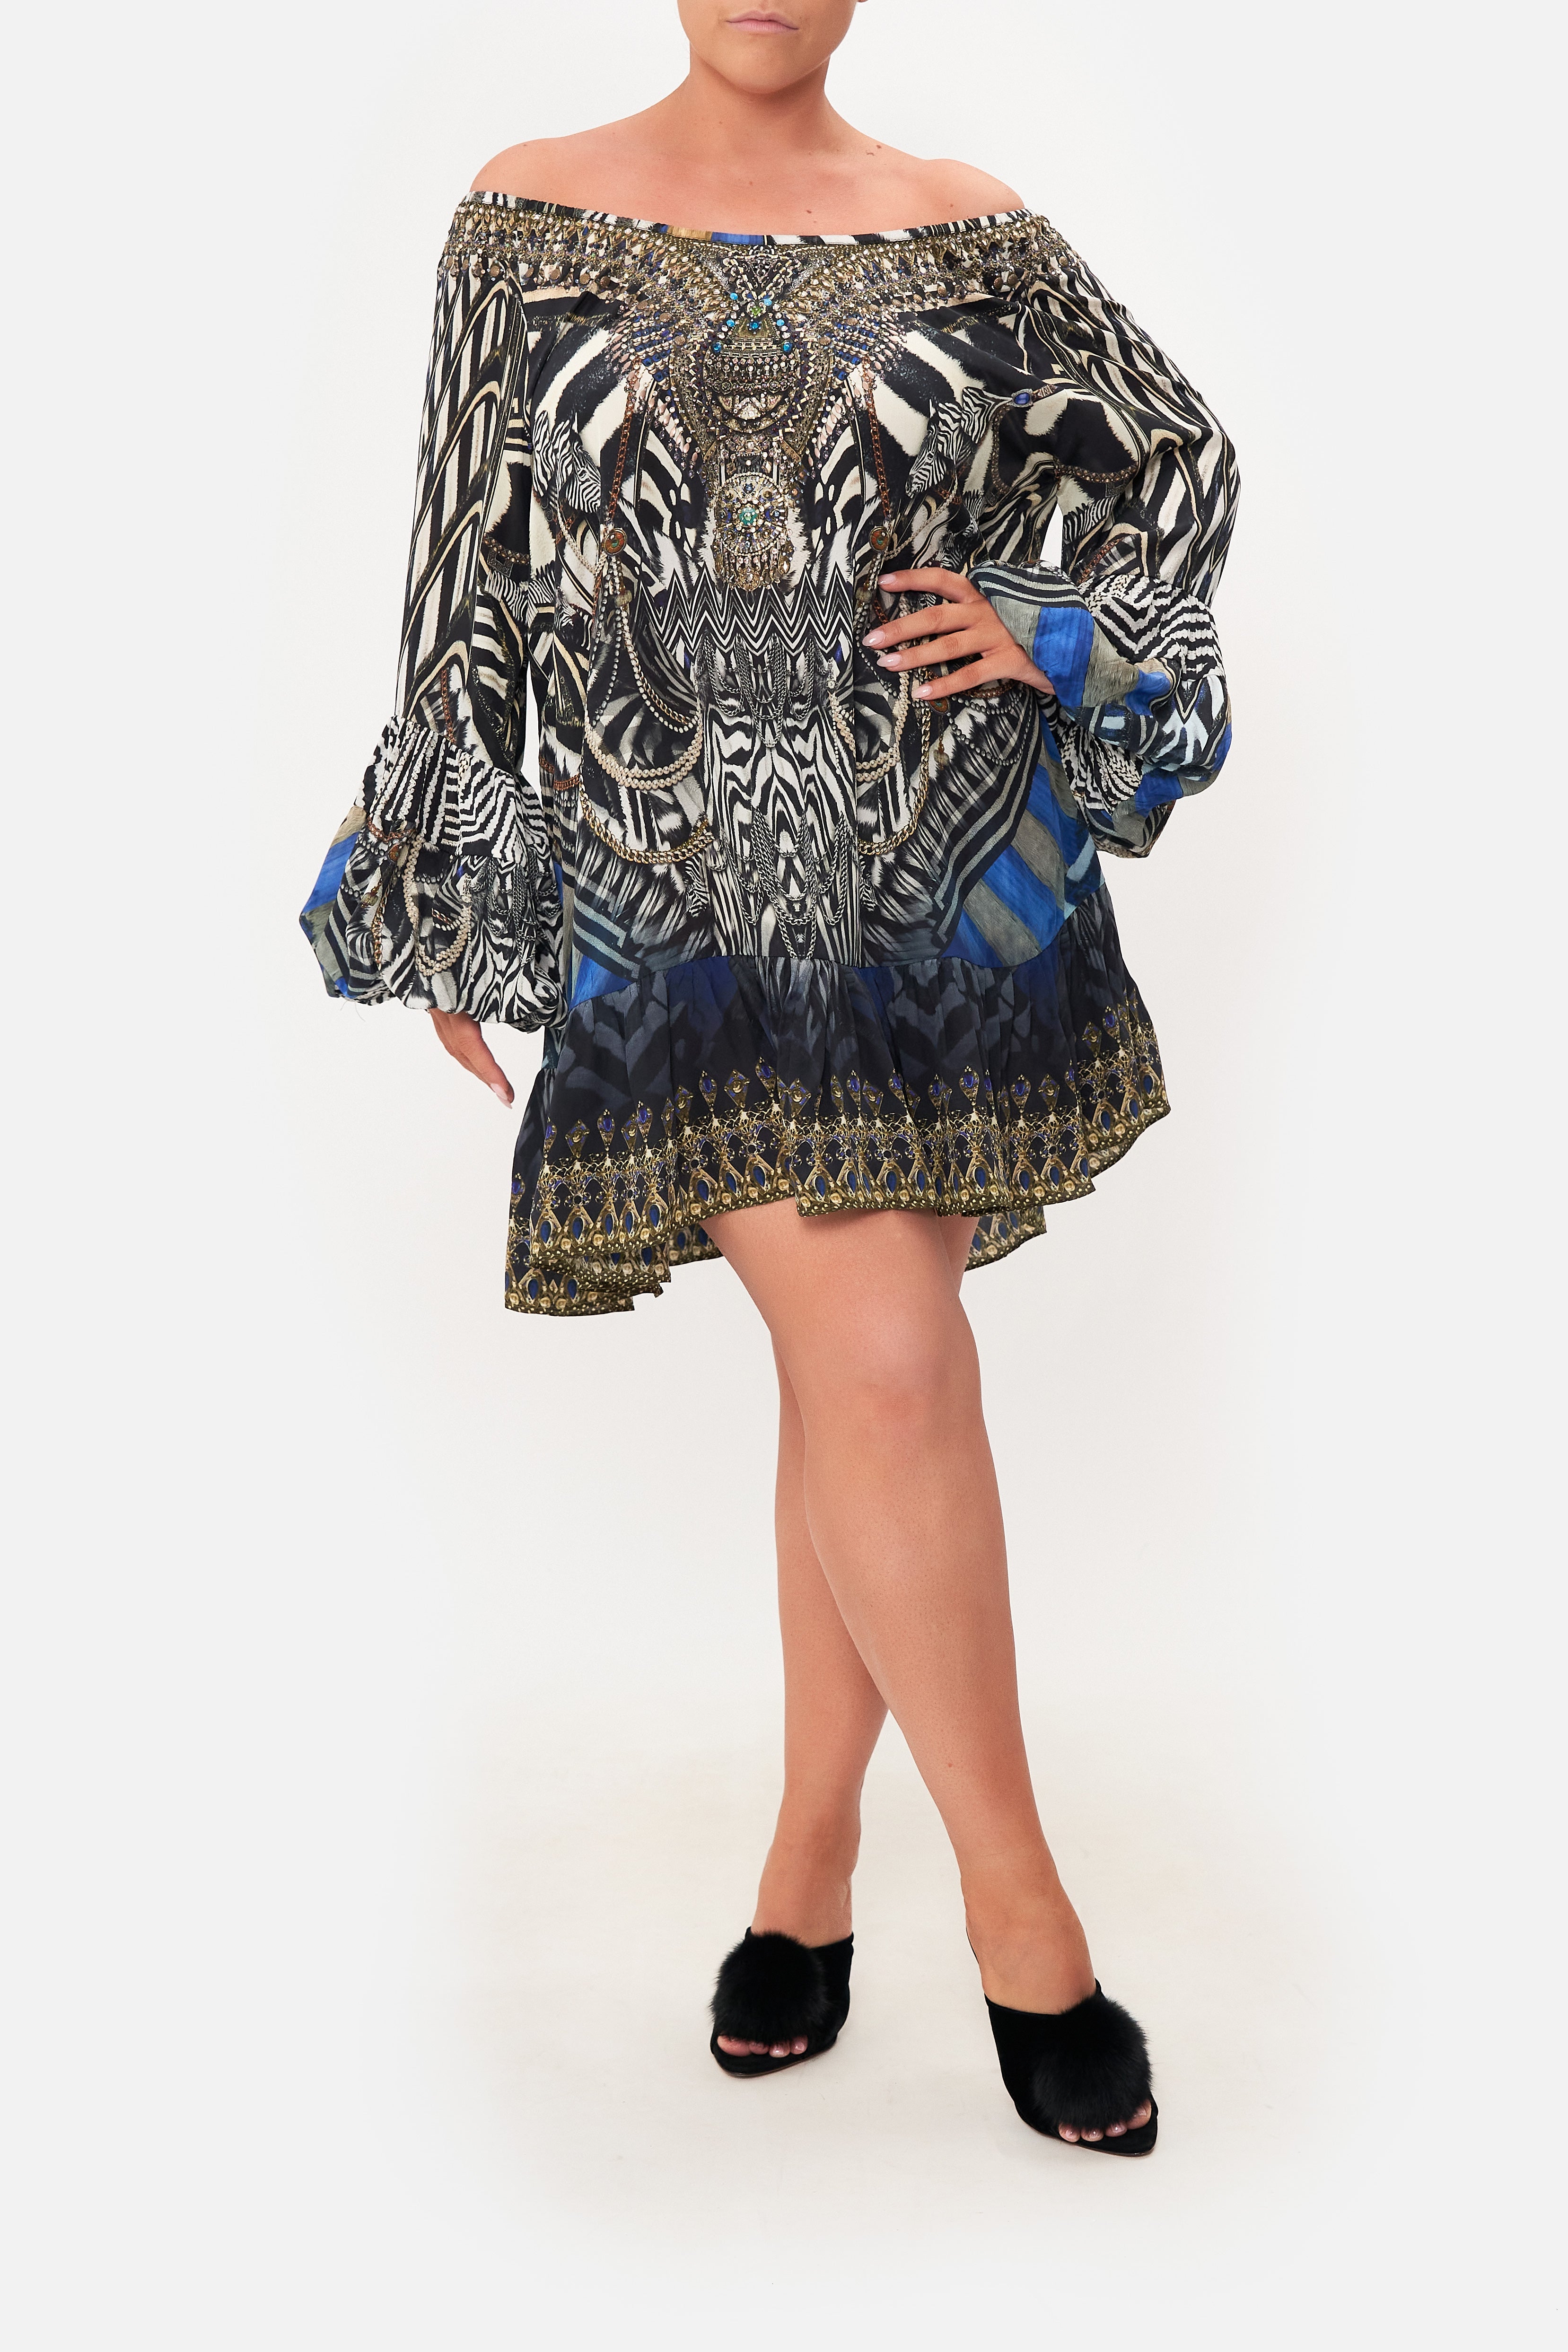 BLOUSON SLEEVE A LINE FRILL DRESS KNIGHT OF THE WILD